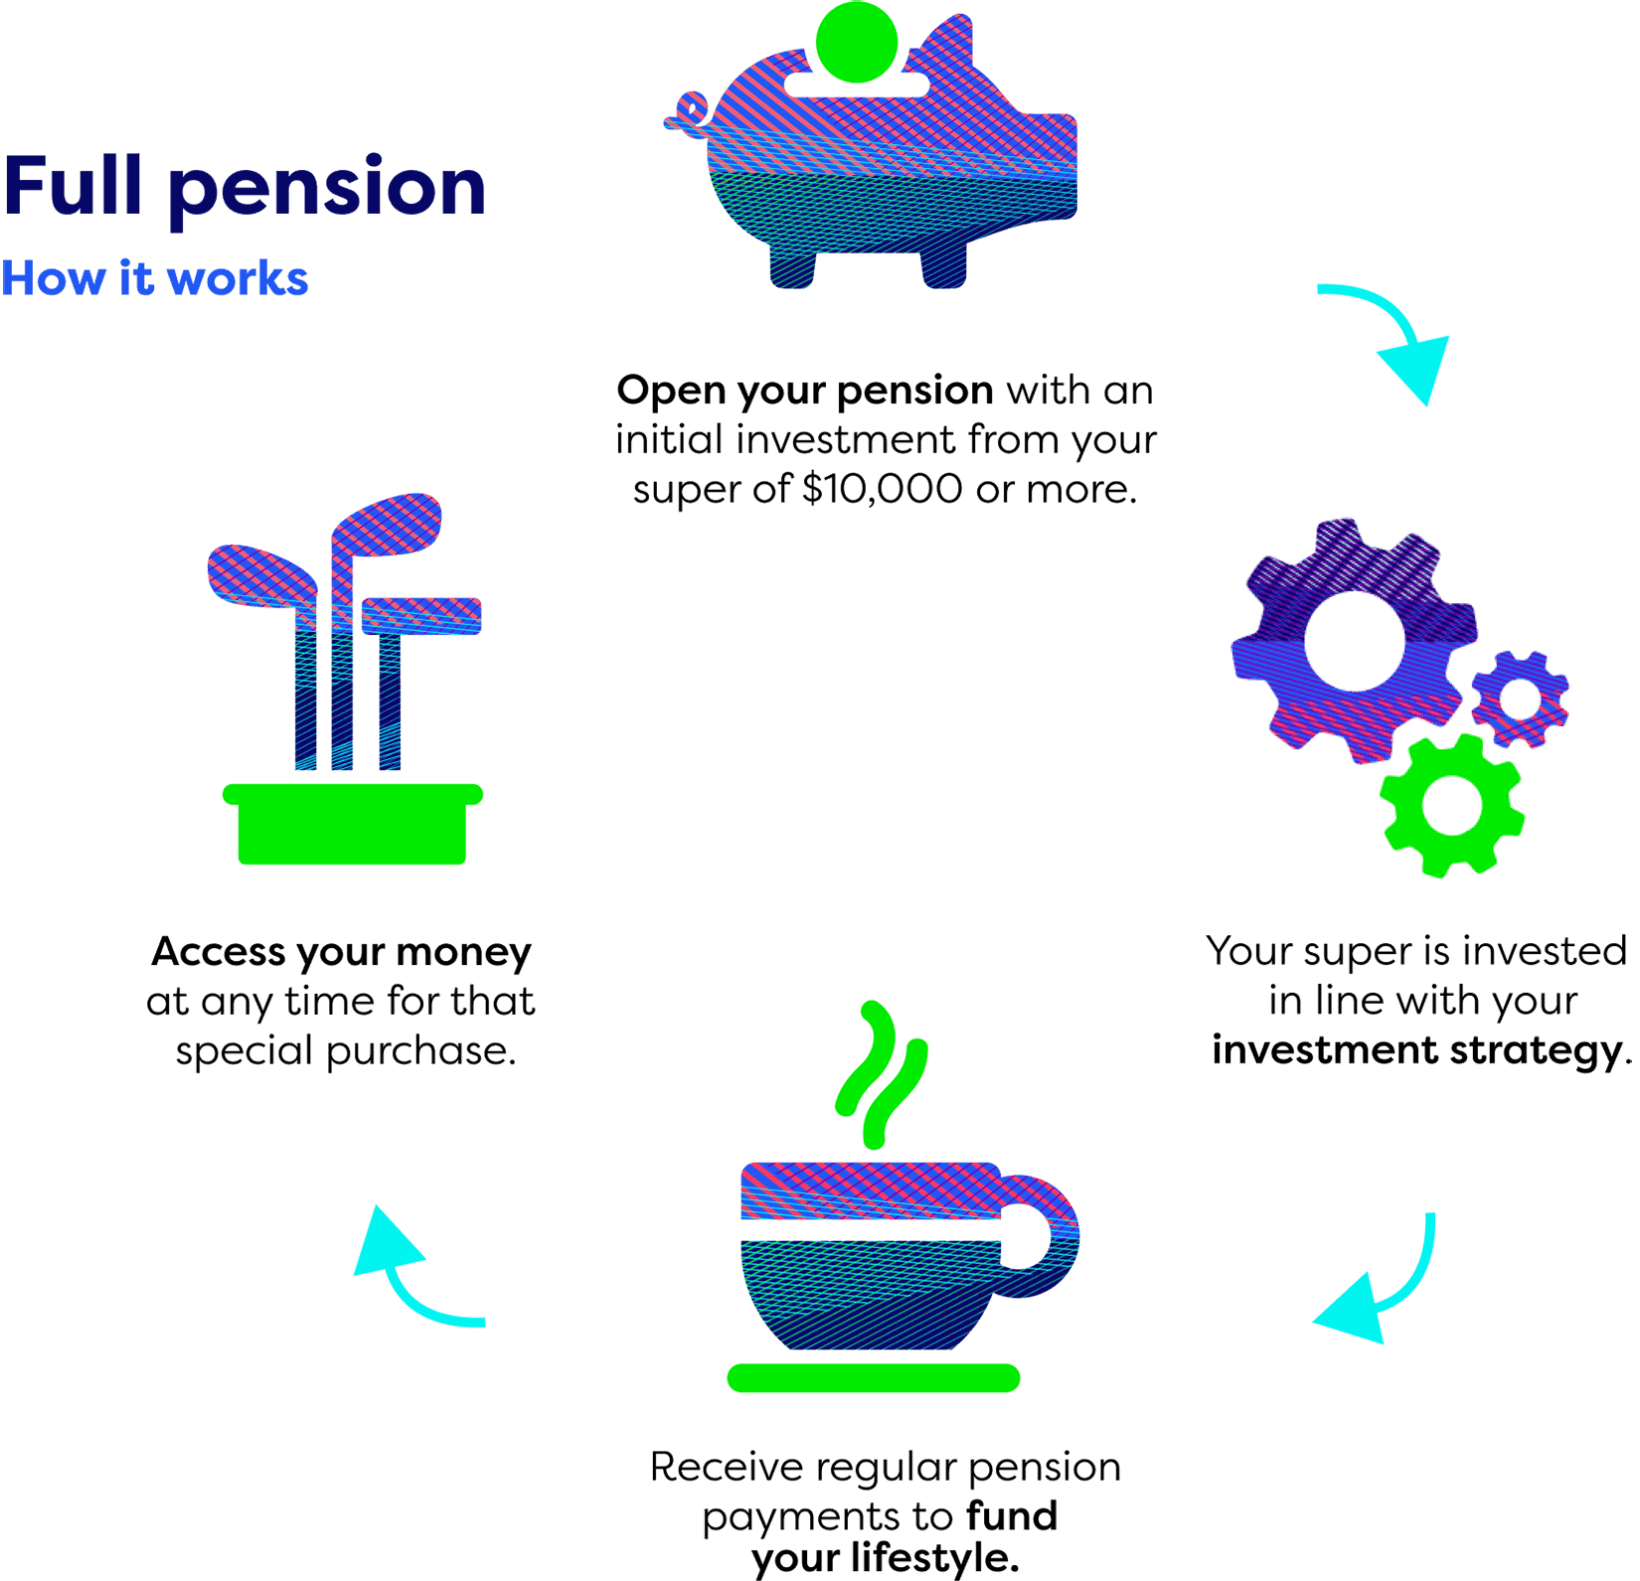 Full pension - how it works